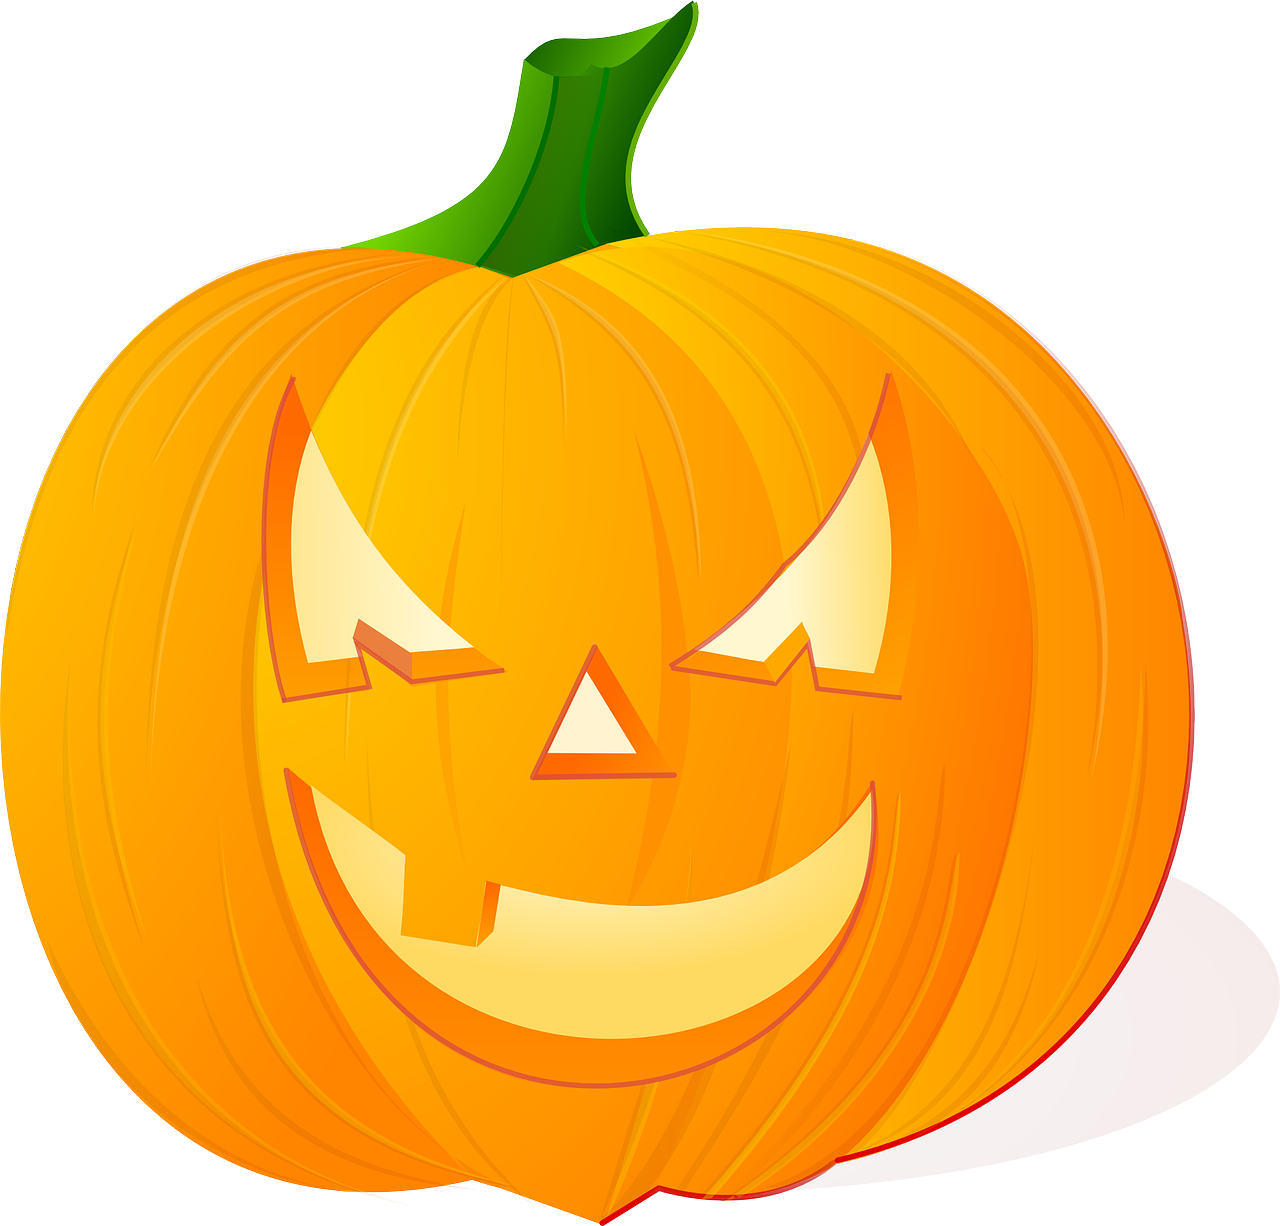 Jack-o'-Lanterns - The Influence of Samhain on Contemporary Halloween Traditions